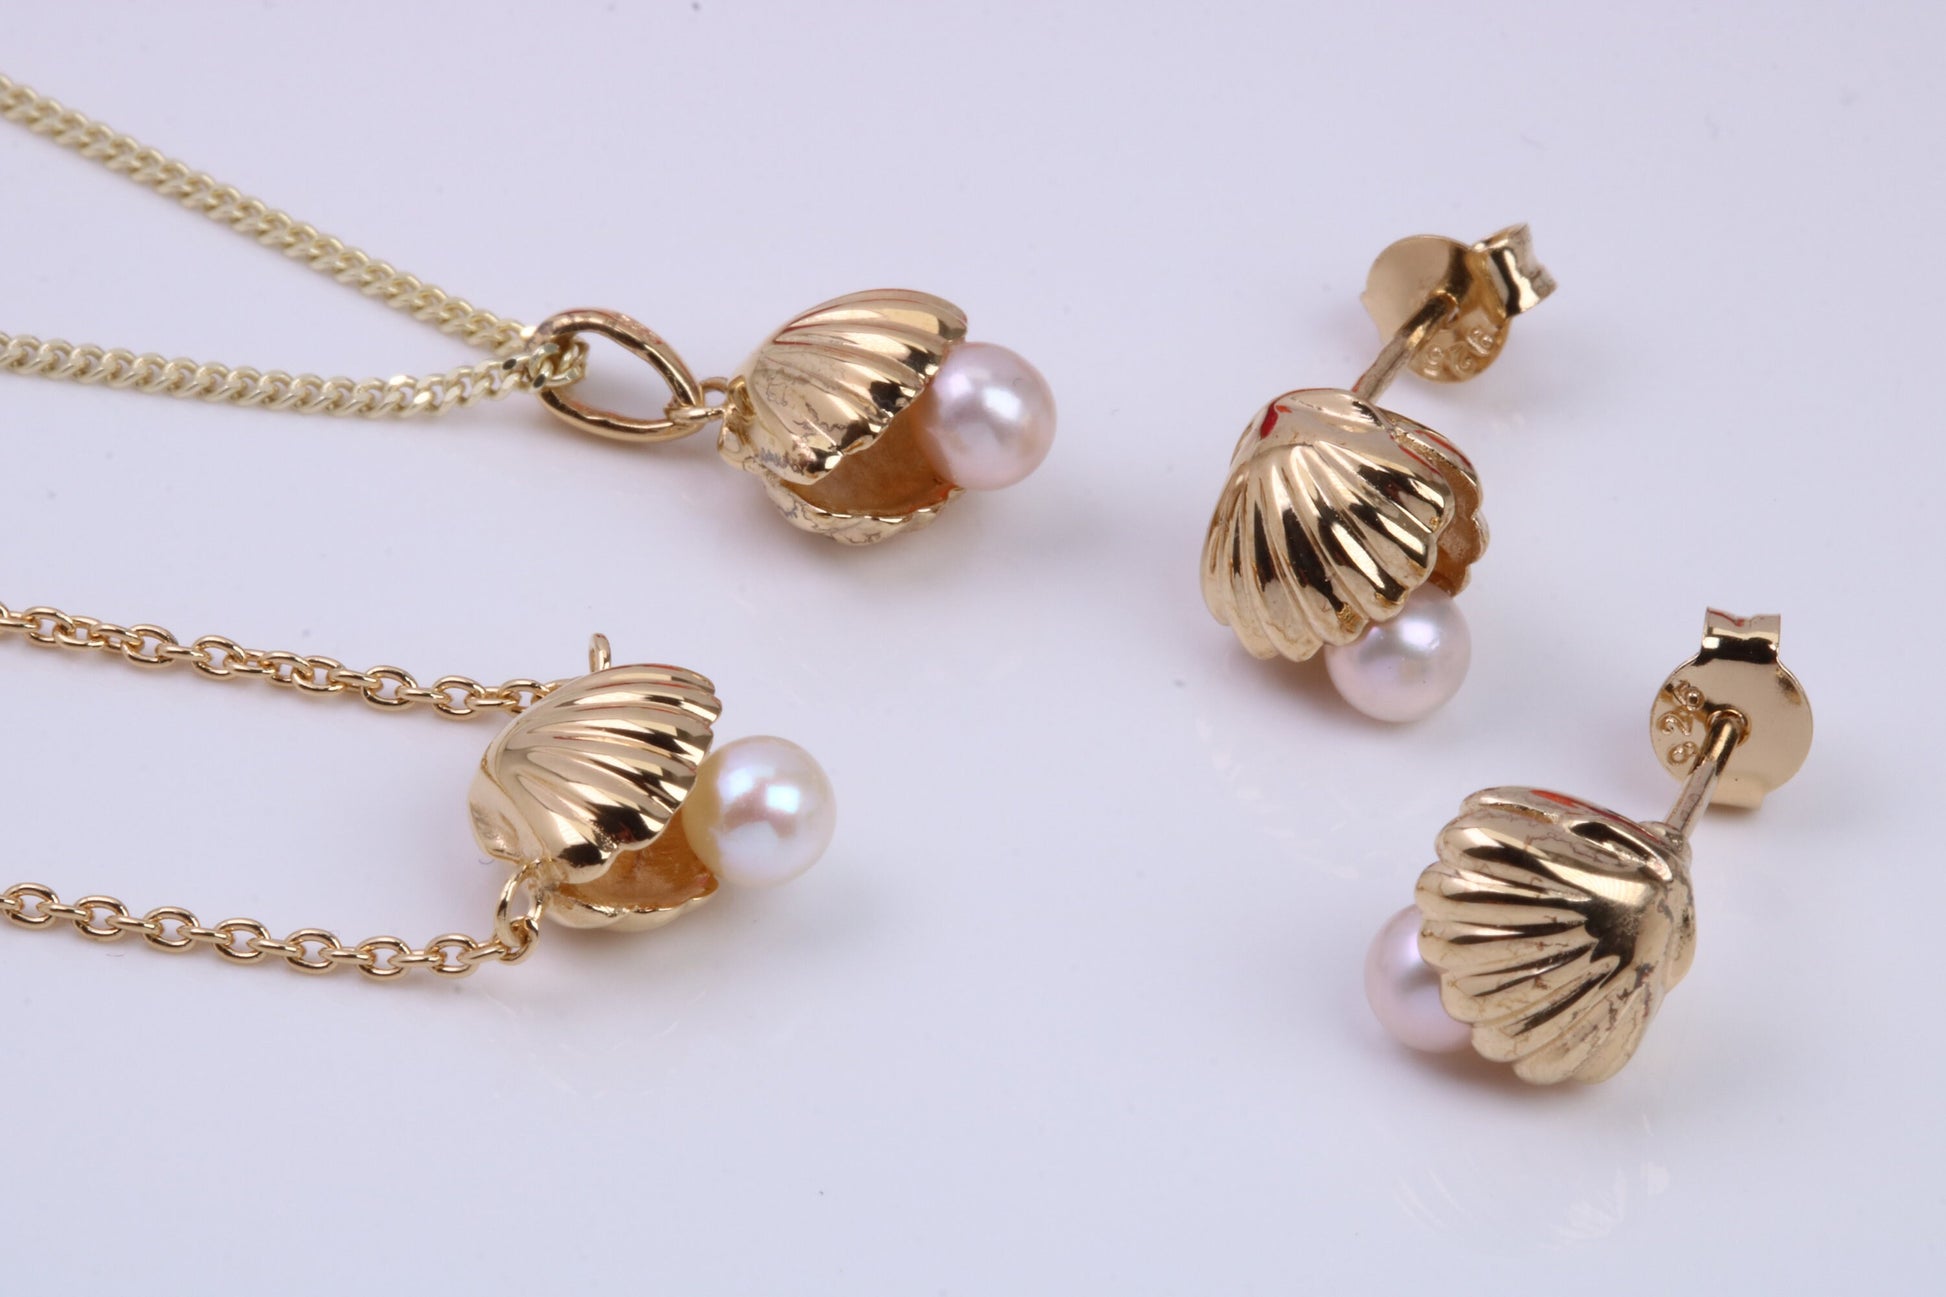 Pearl set Shell Necklace and Earrings with Matching Bracelet, Made from solid Sterling Silver, 18ct Yellow Gold Plated